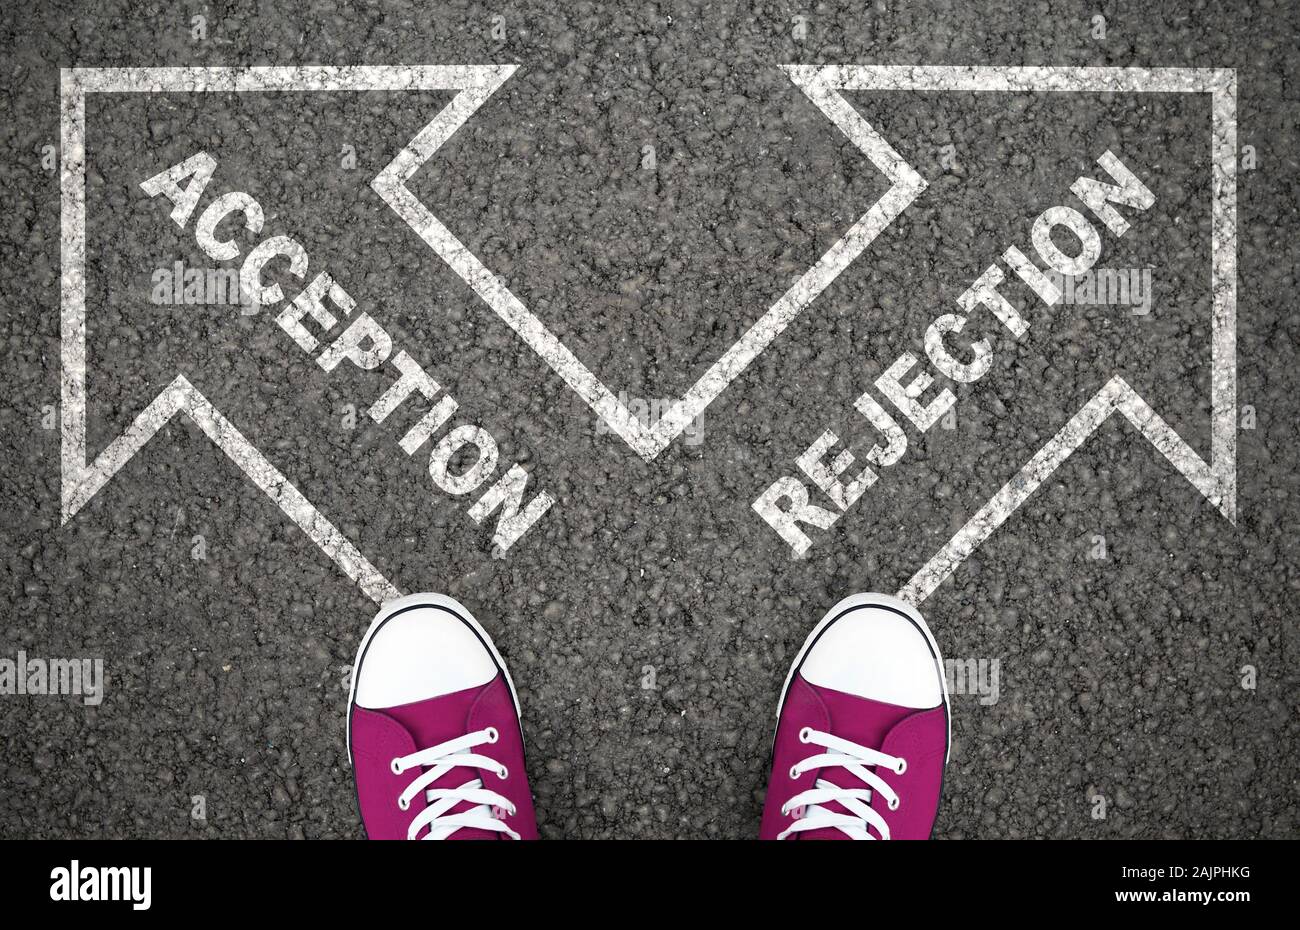 Acception Or Rejection Decision At Crossroad. Approved or Disapproved, Yes and No, Right or Wrong Destination Stock Photo